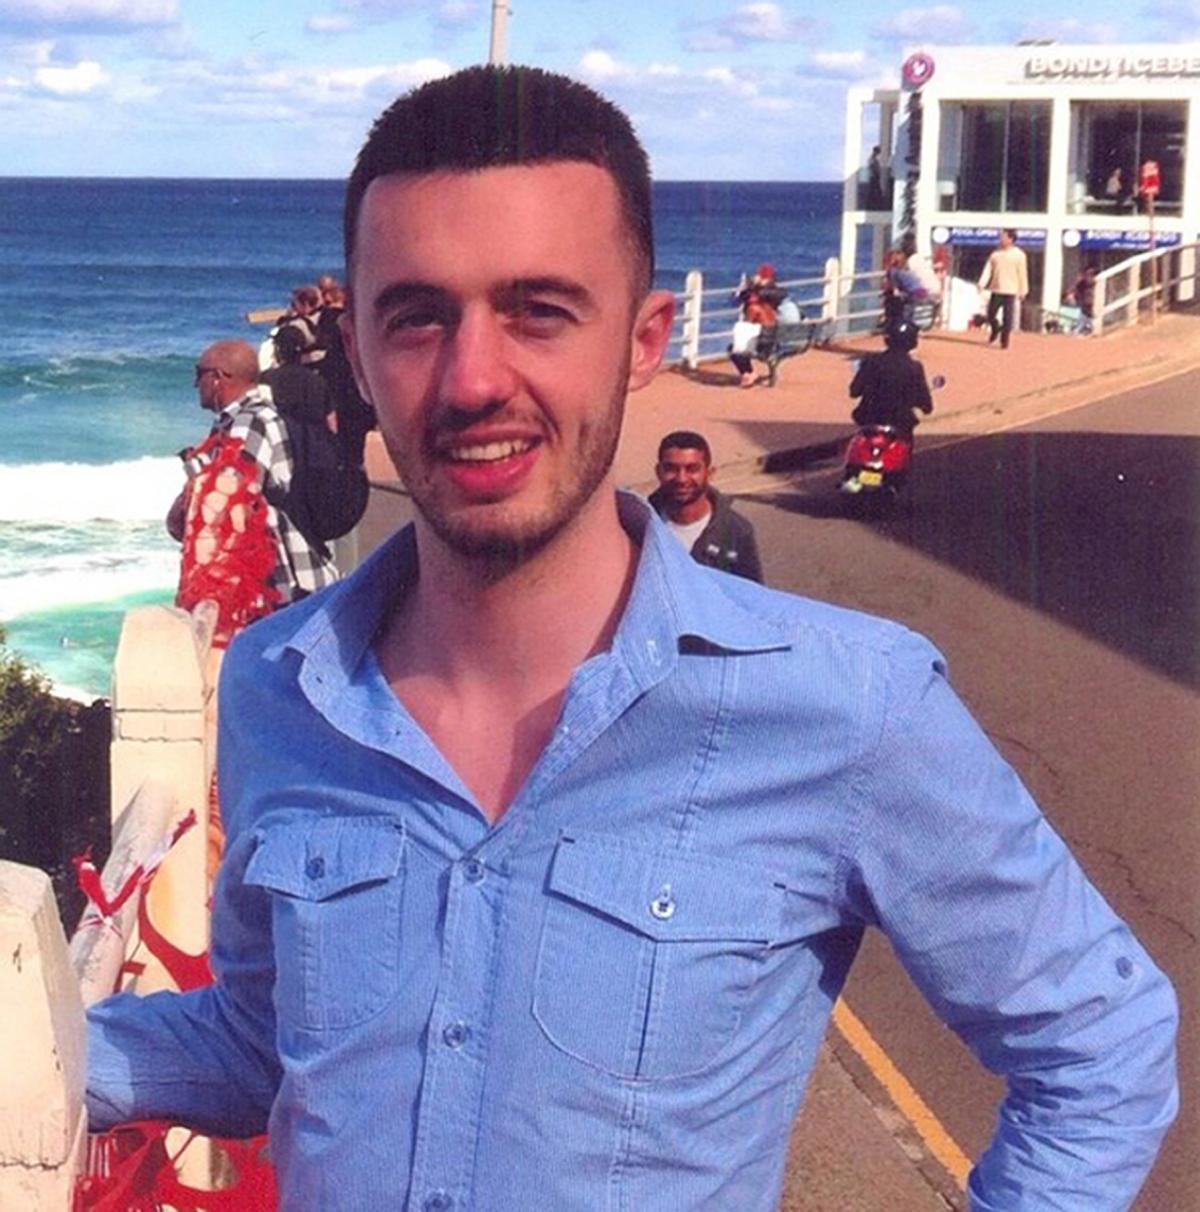 Craig Mallon had been on holiday in Spain in 2012 when tragedy struck